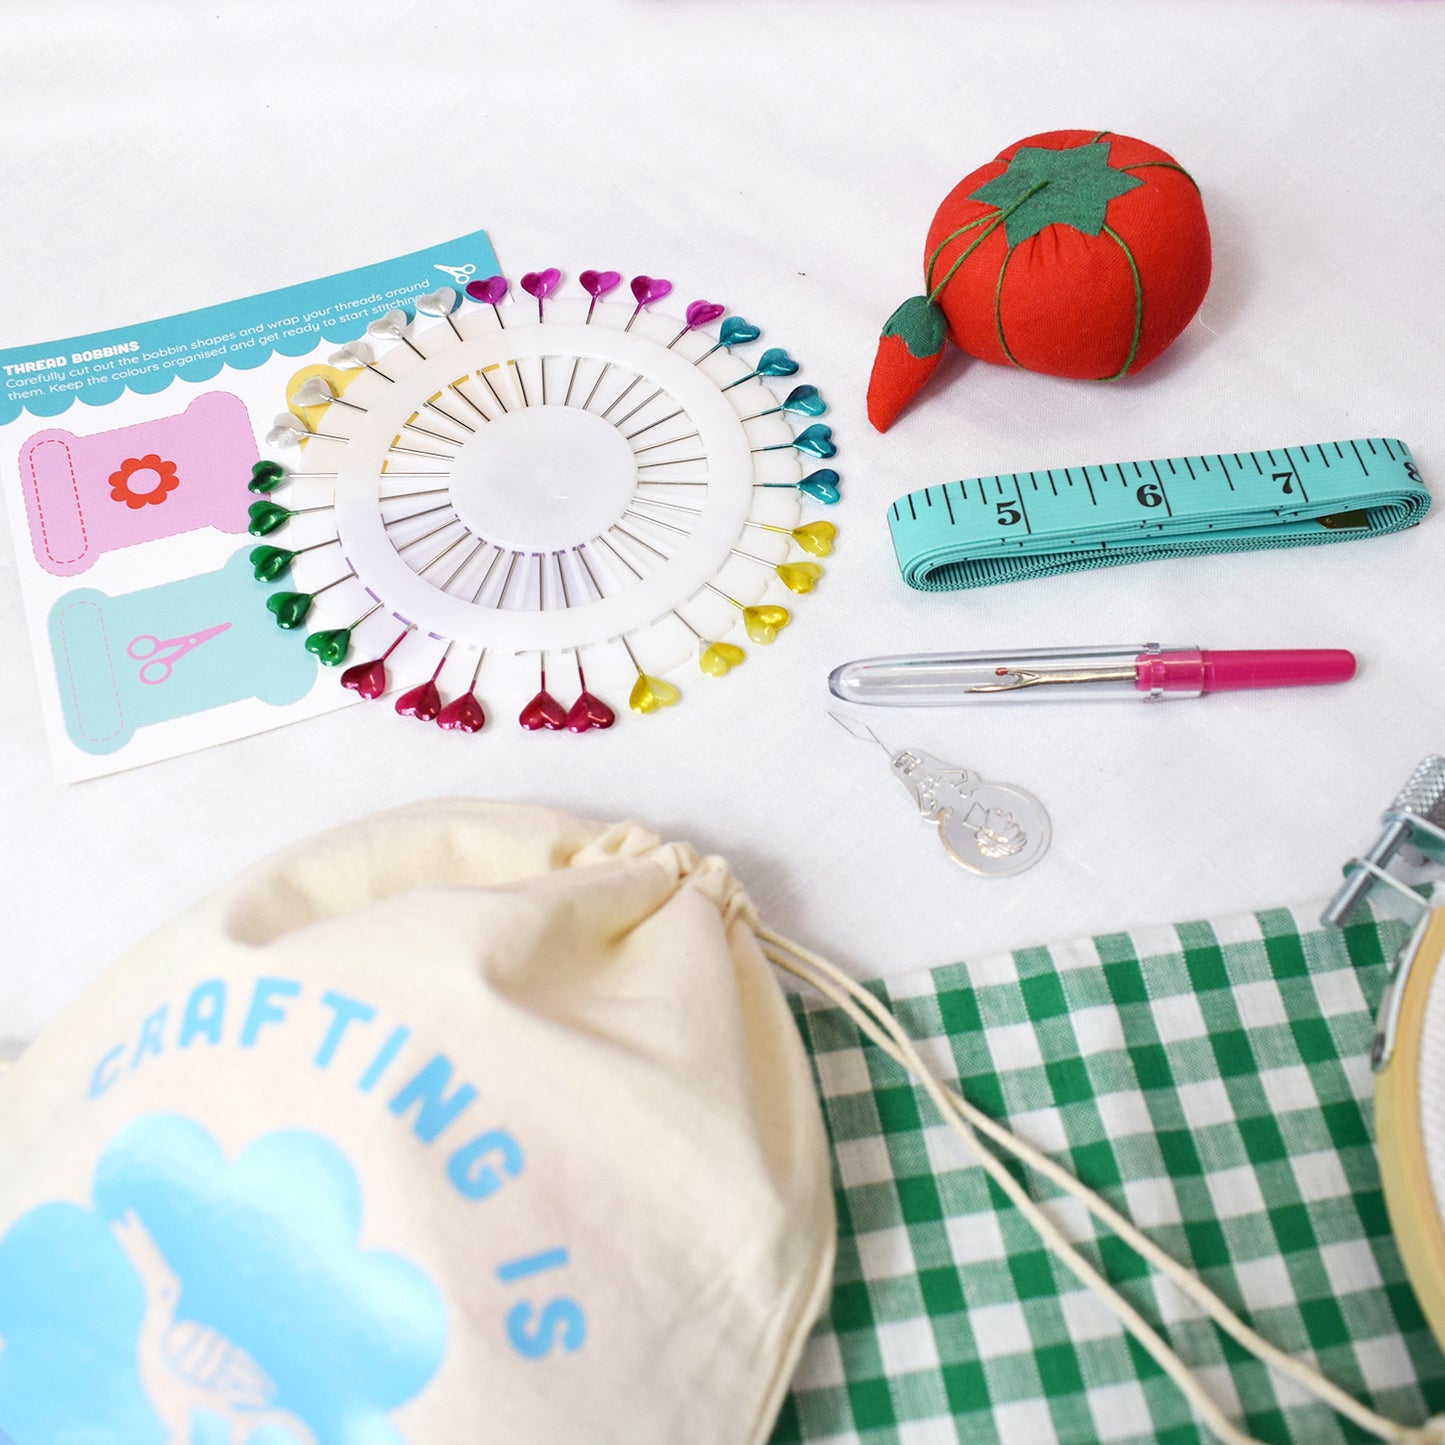 'Crafting is good for you' Mini Sewing Kit